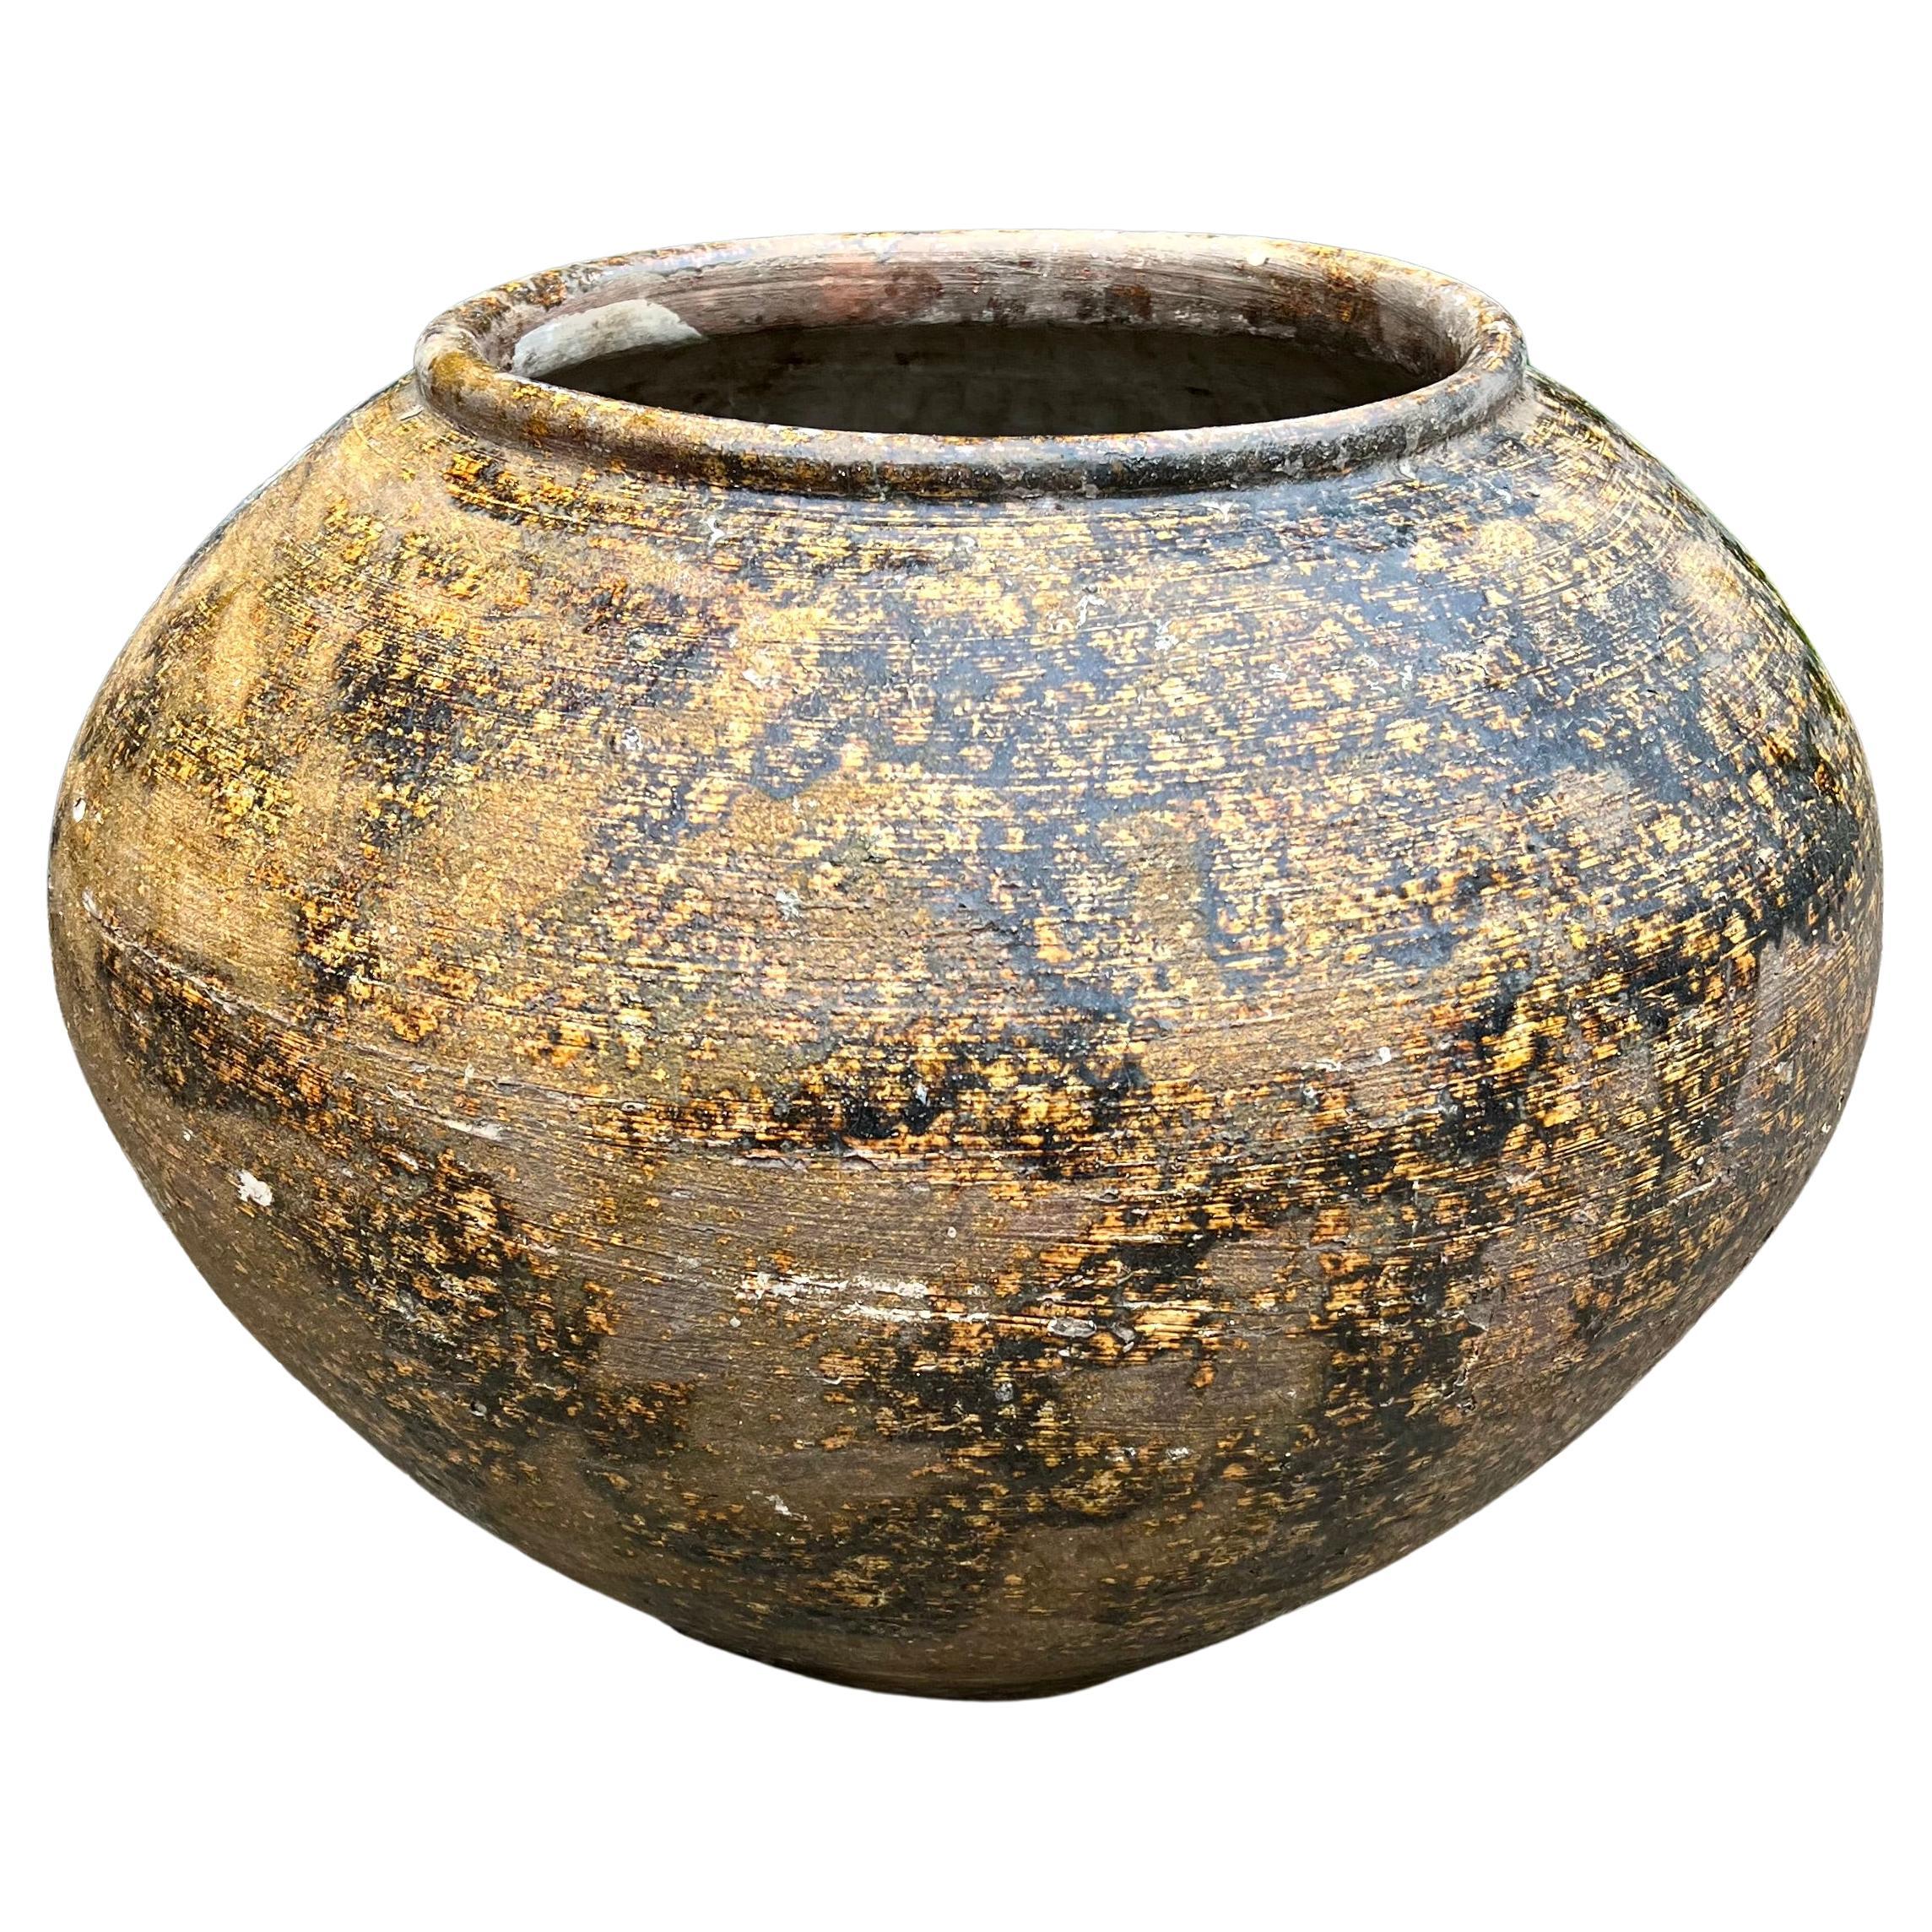 Golden Brown Patinated Glazed Terracotta Planter For Sale